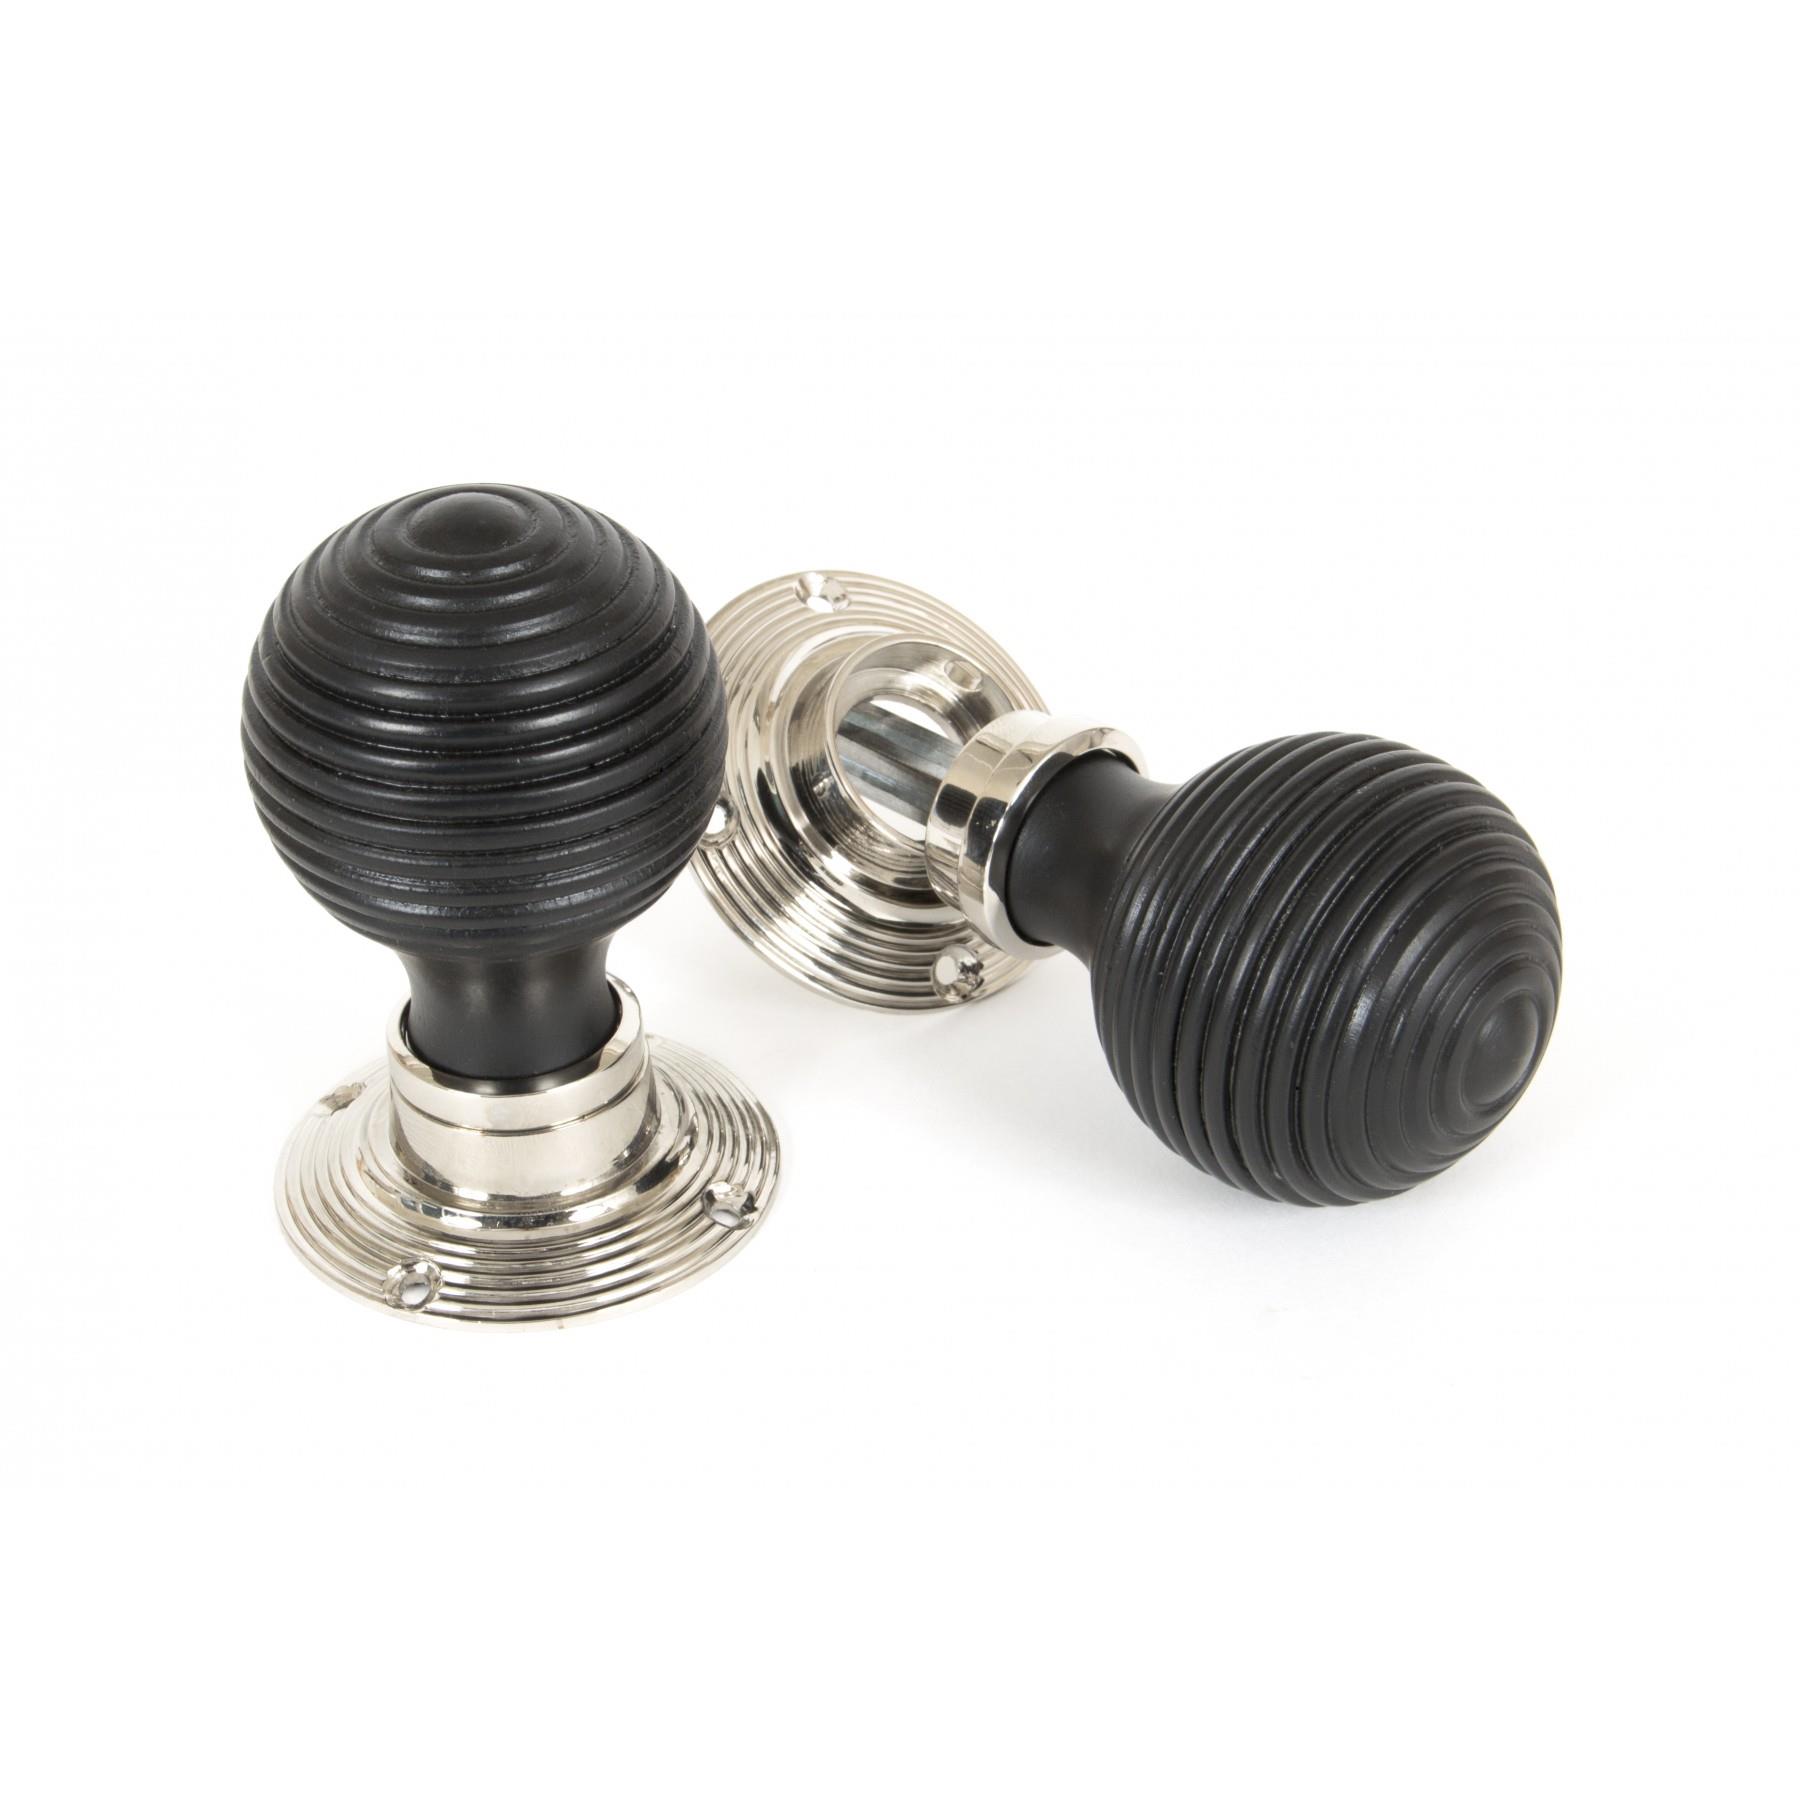 From The Anvil 83634 Beehive Mortice / Rim Knob Set; 58mm Diameter; Ebony & Polished Nickel (EBY/NP)